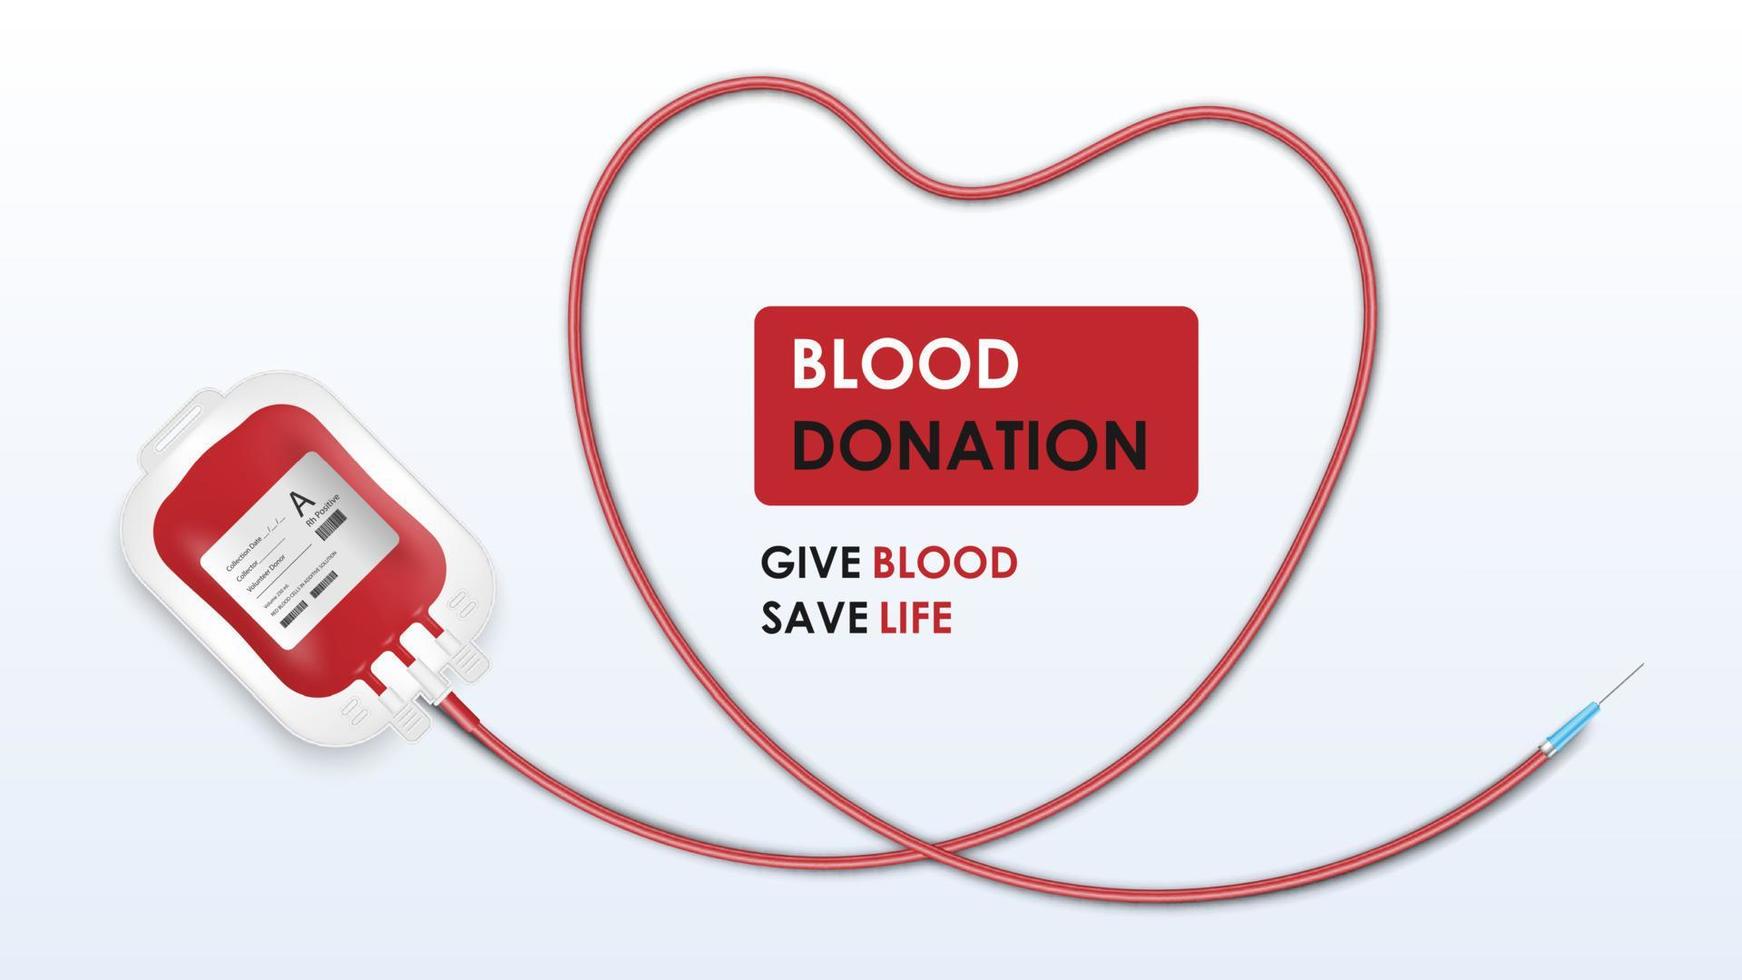 Blood donation concept, Blood bag and heart on white background,  vector illustration